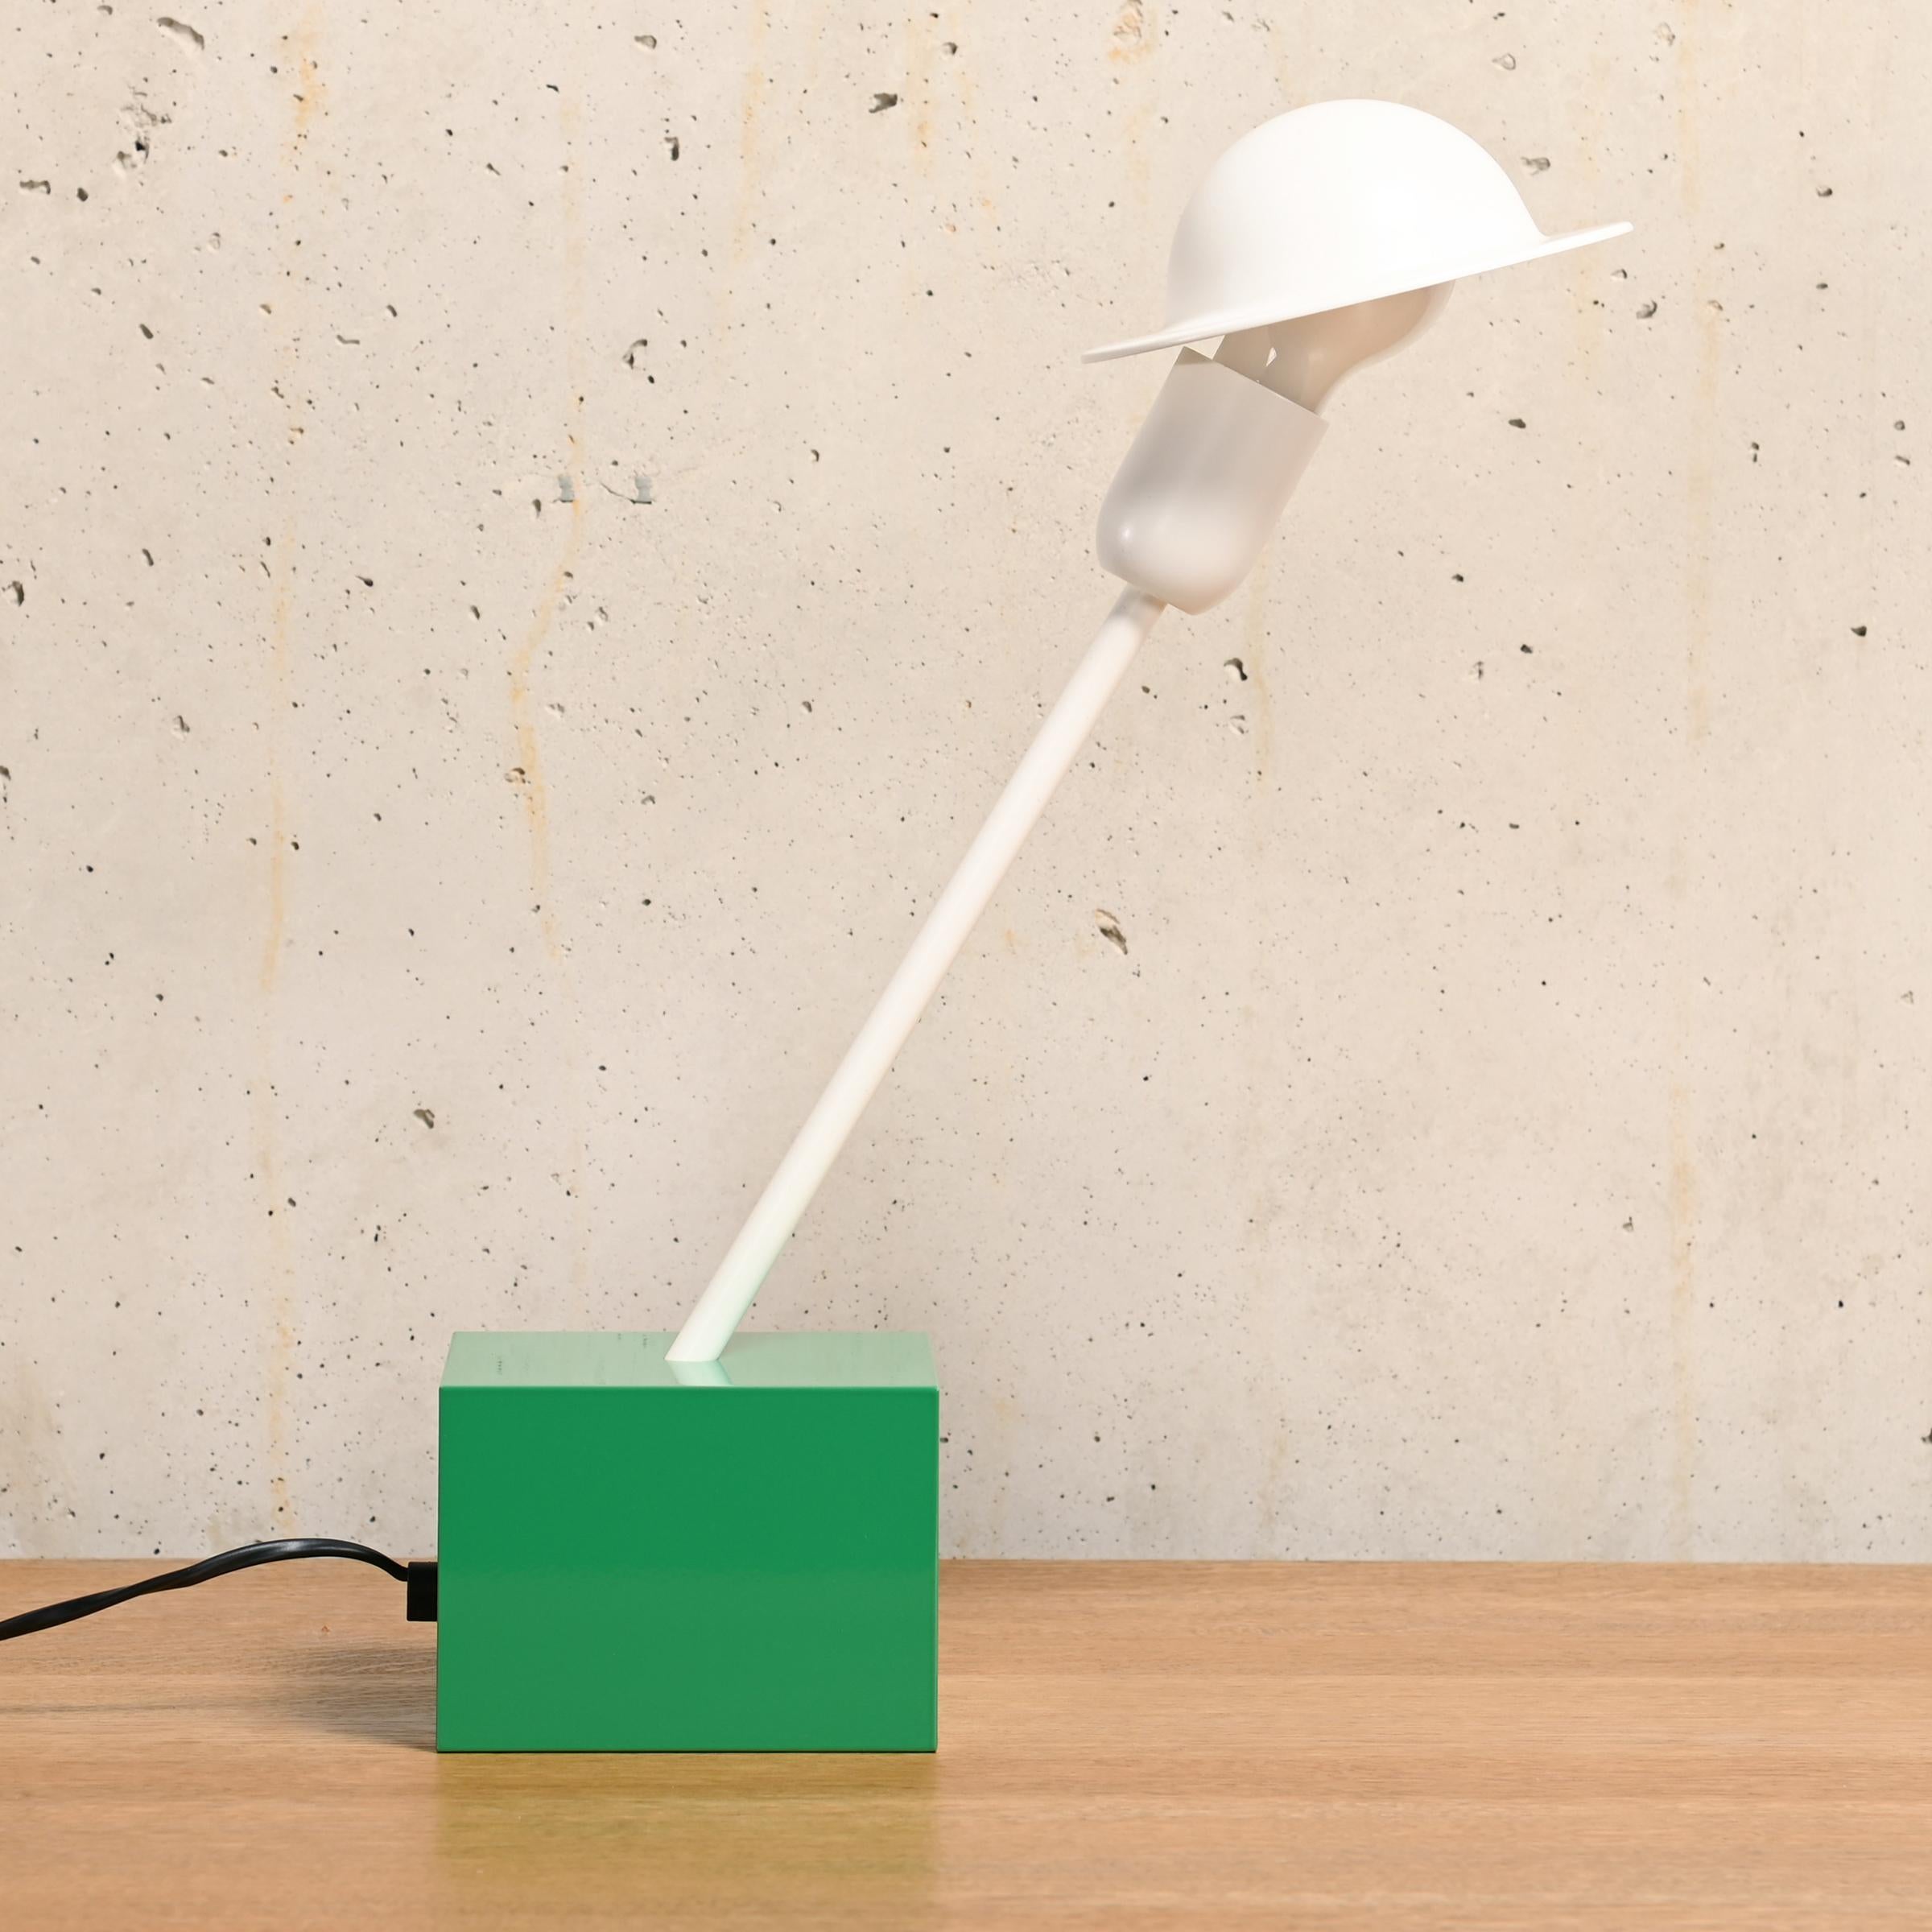 Great and playful 'Don' table lamp designed by Ettore Sottsass for Stilnovo, Italy in 1977. The lamp has a heavy bright green cubic base and a white slanted rod with lamp holder. The lampshade is attached to the lightbulb with a metal clip and can